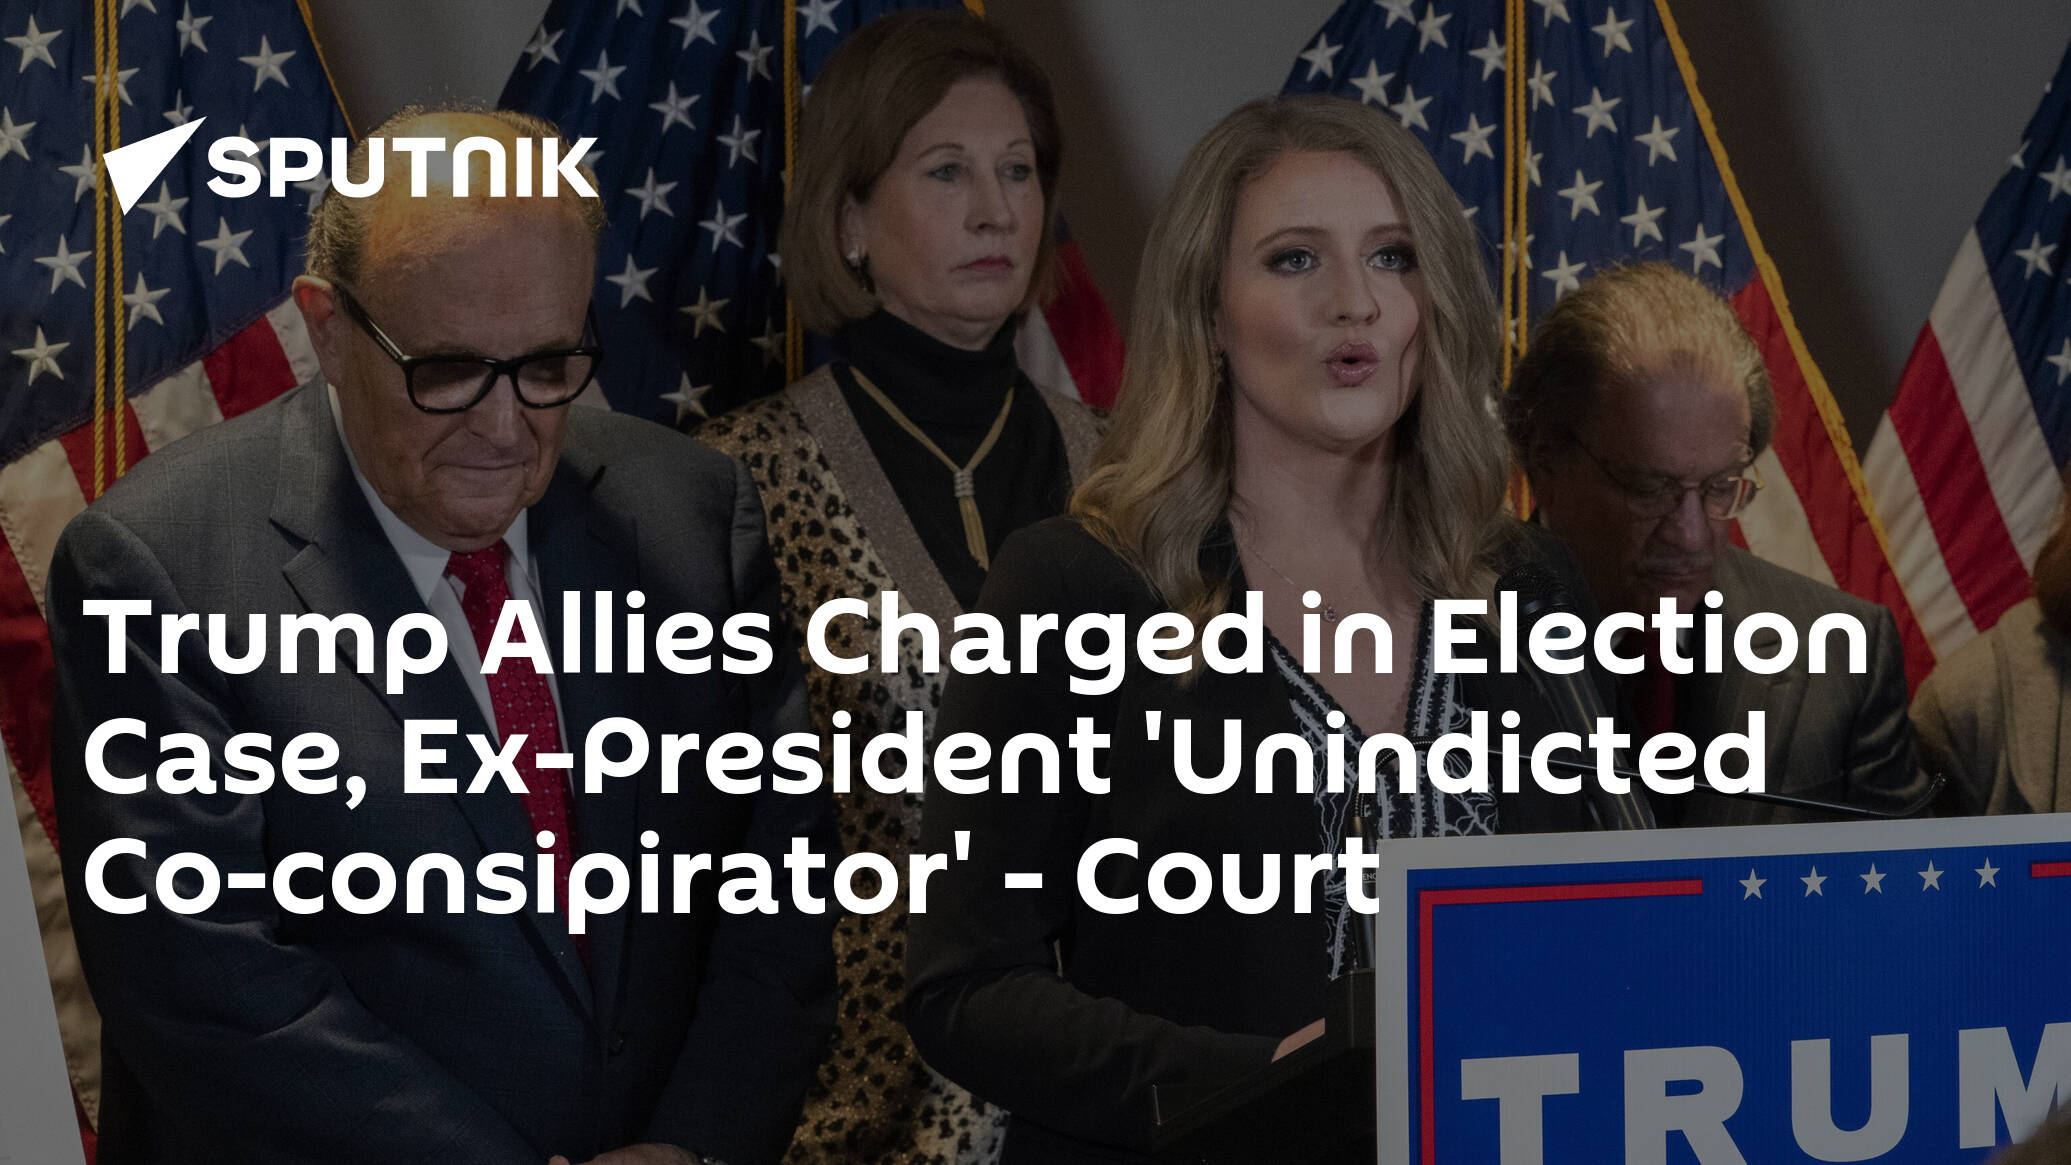 Trump Allies Charged in Election Case, Ex-President 'Unindicted Co-consipirator' – Court